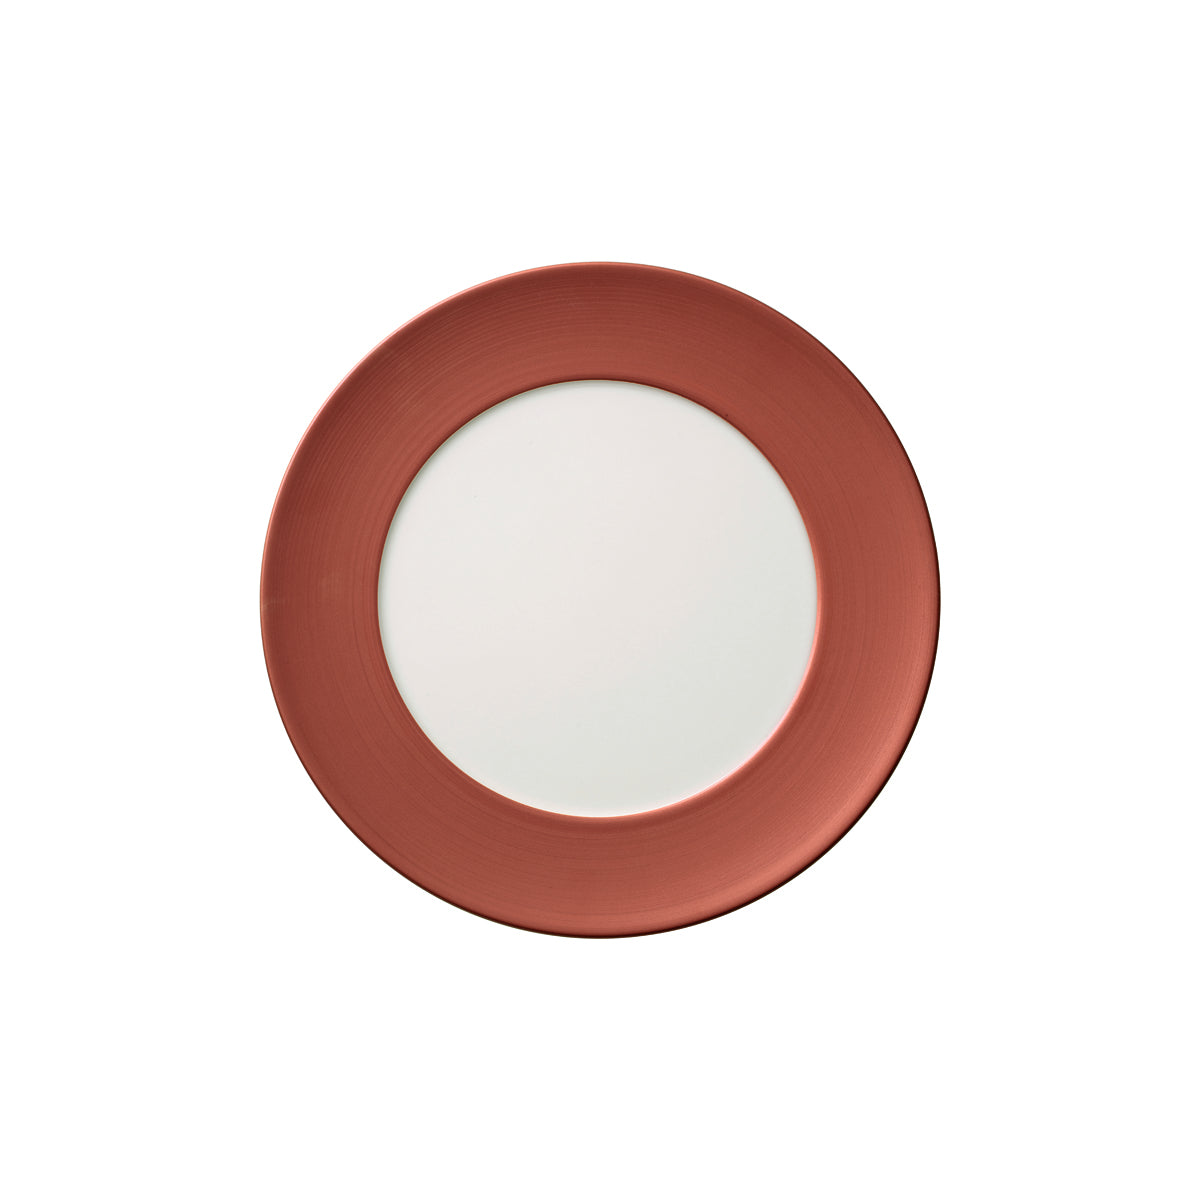 VB16-4070-2590 Villeroy And Boch Villeroy And Boch Copper Glow Plate Outside Wide Rim 320mm Tomkin Australia Hospitality Supplies